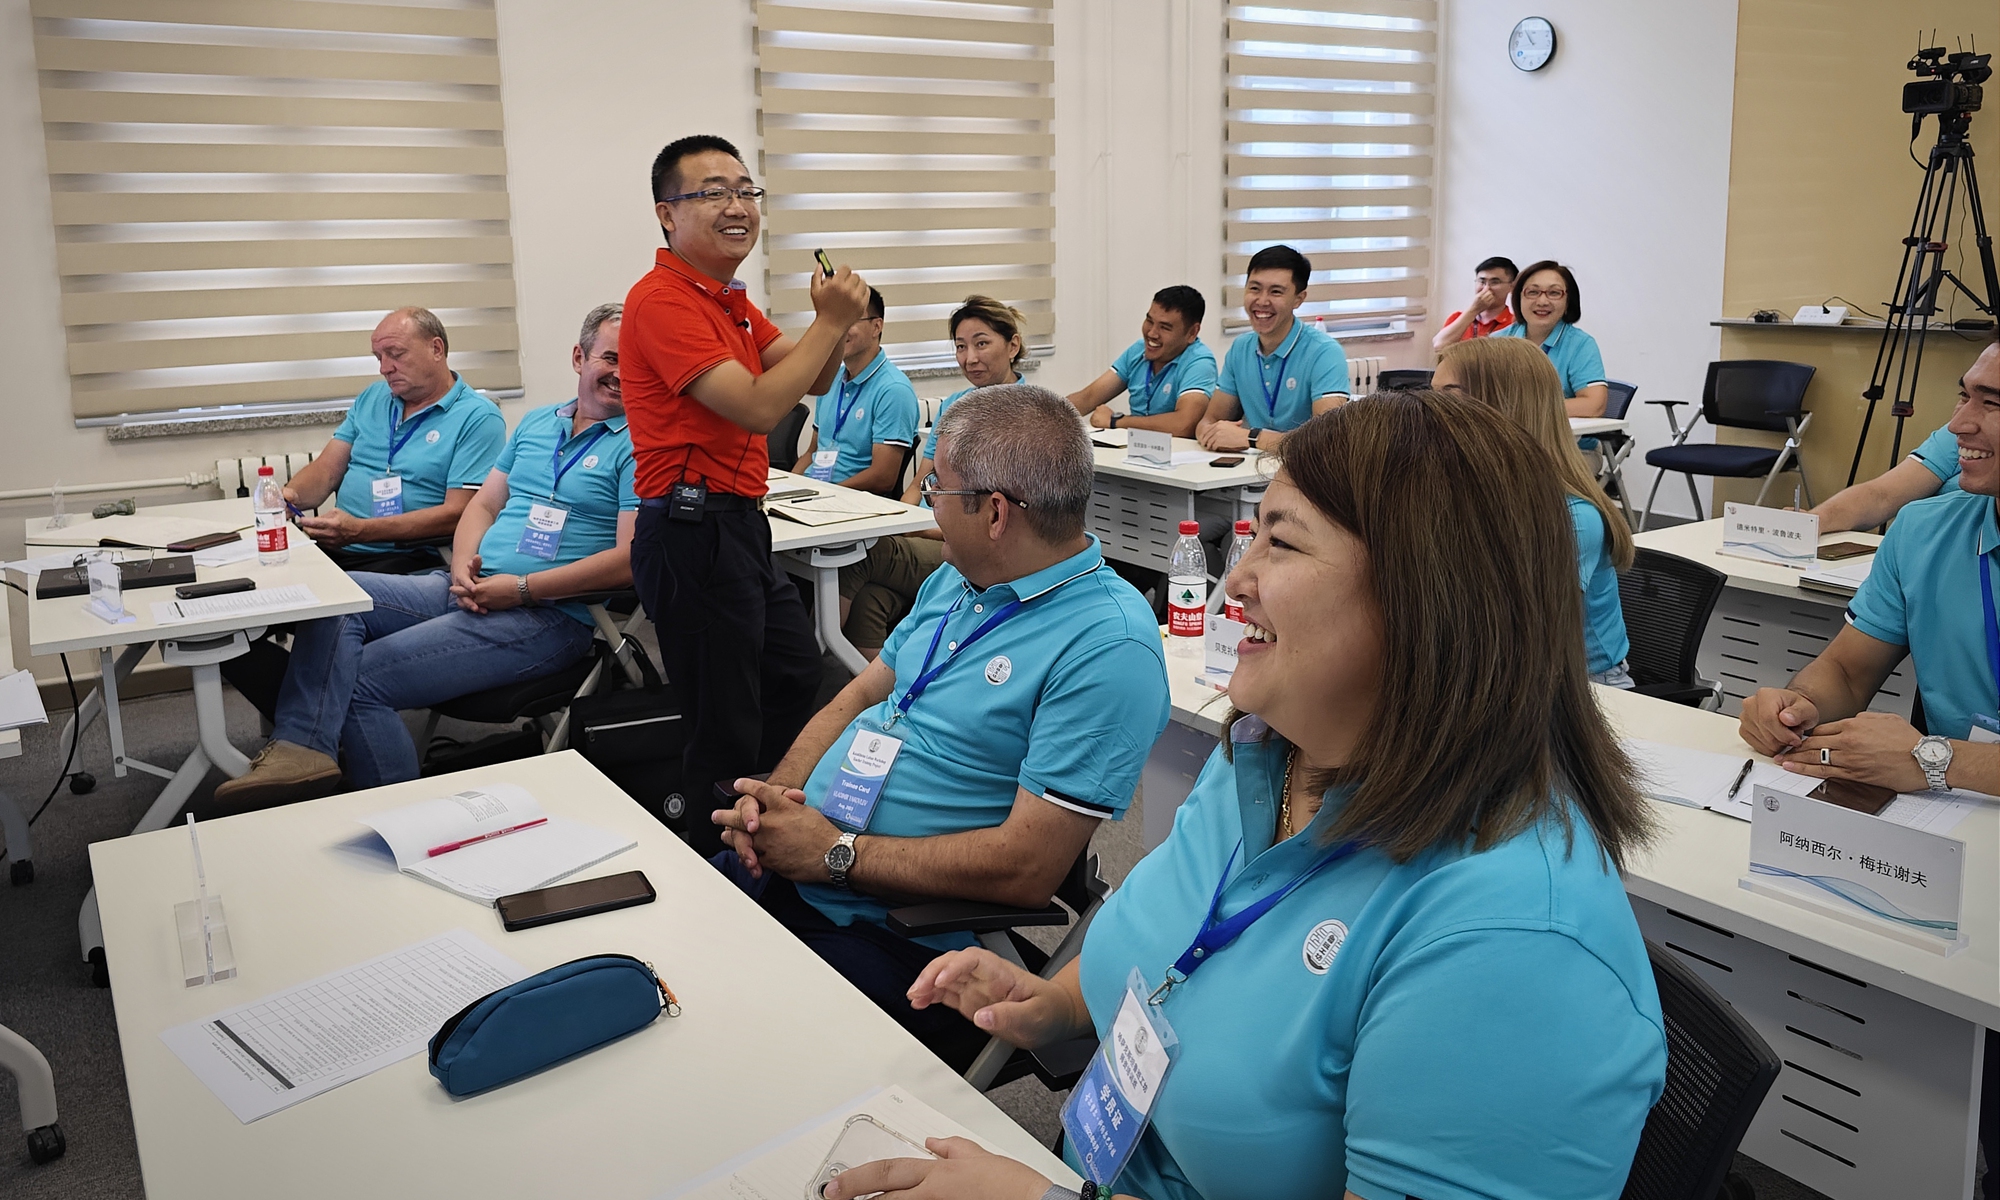 Teachers from the East Kazakhstan Technical University attend a theory lesson at Tianjin Vocational Institute on August 7, 2023. Photo: Lin Xiaoyi/GT